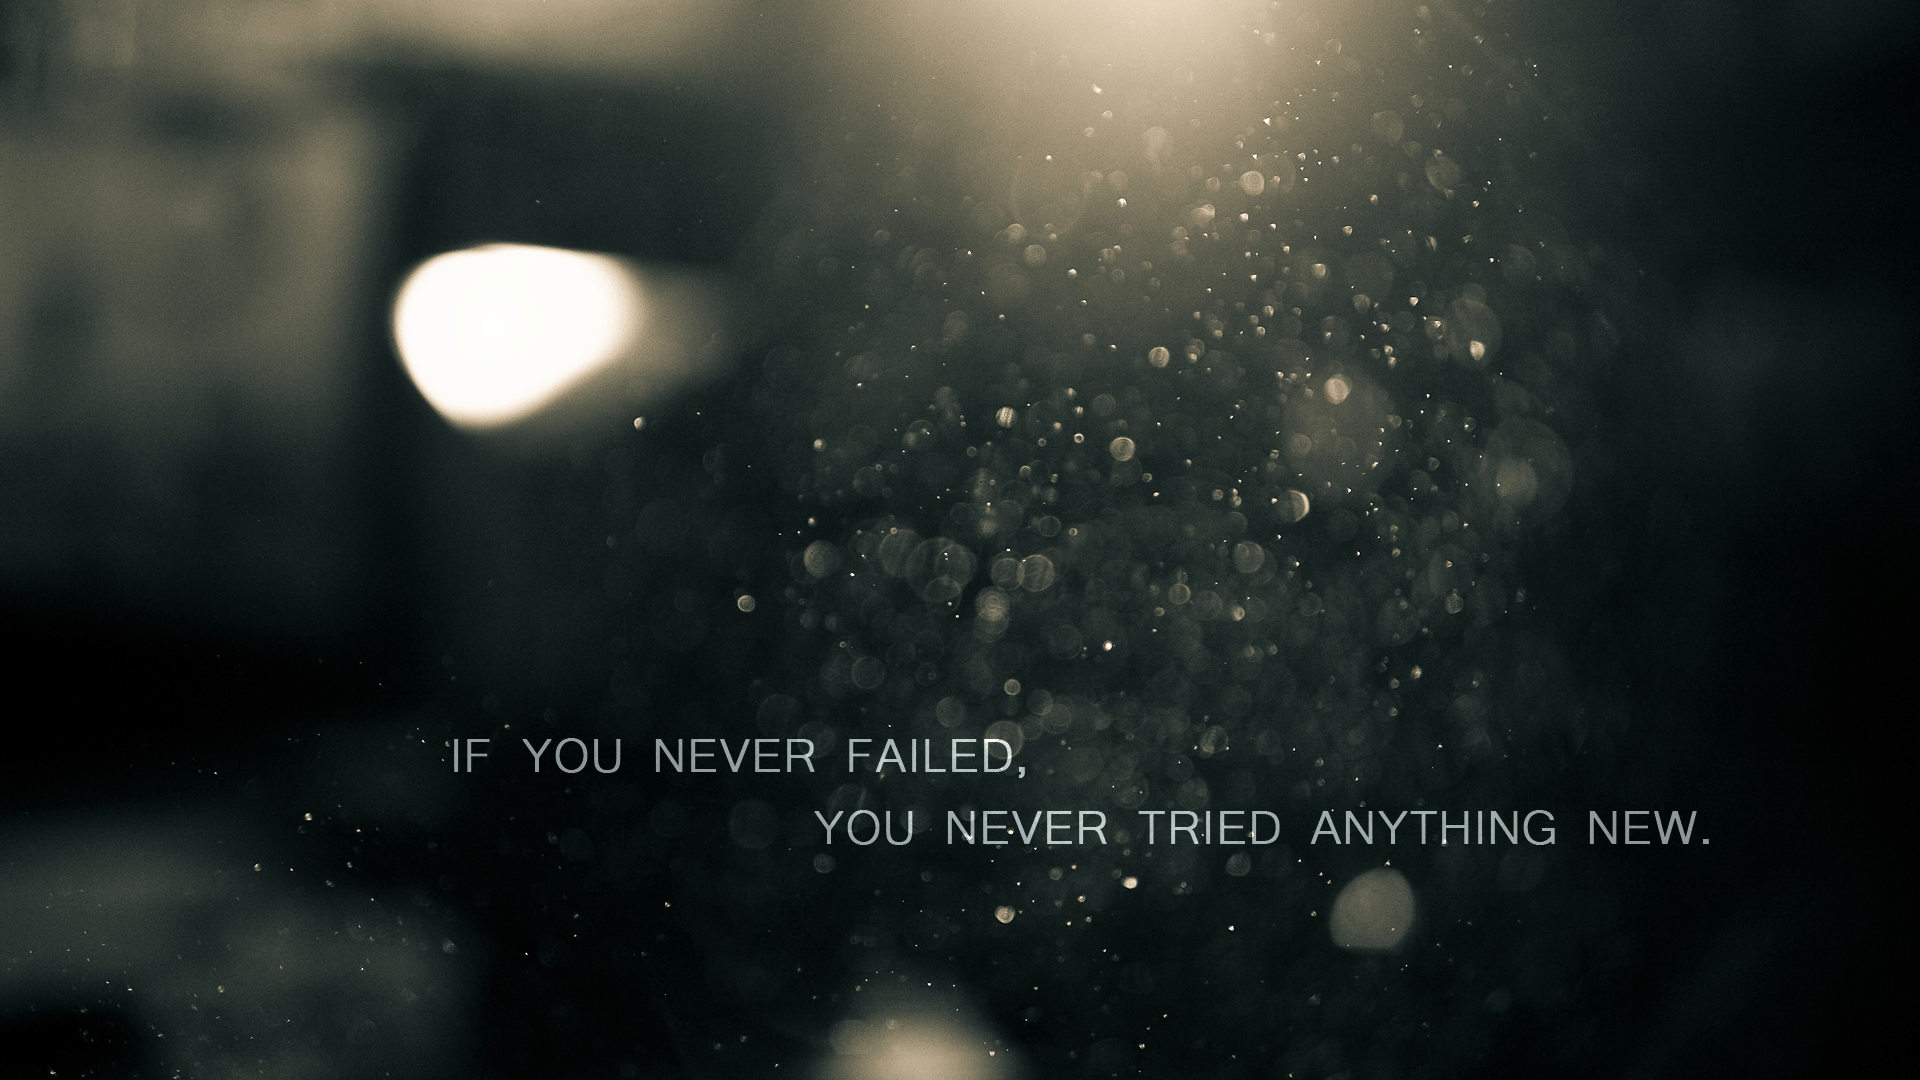 Quotes Laptop Wallpapers - Wallpaper Cave